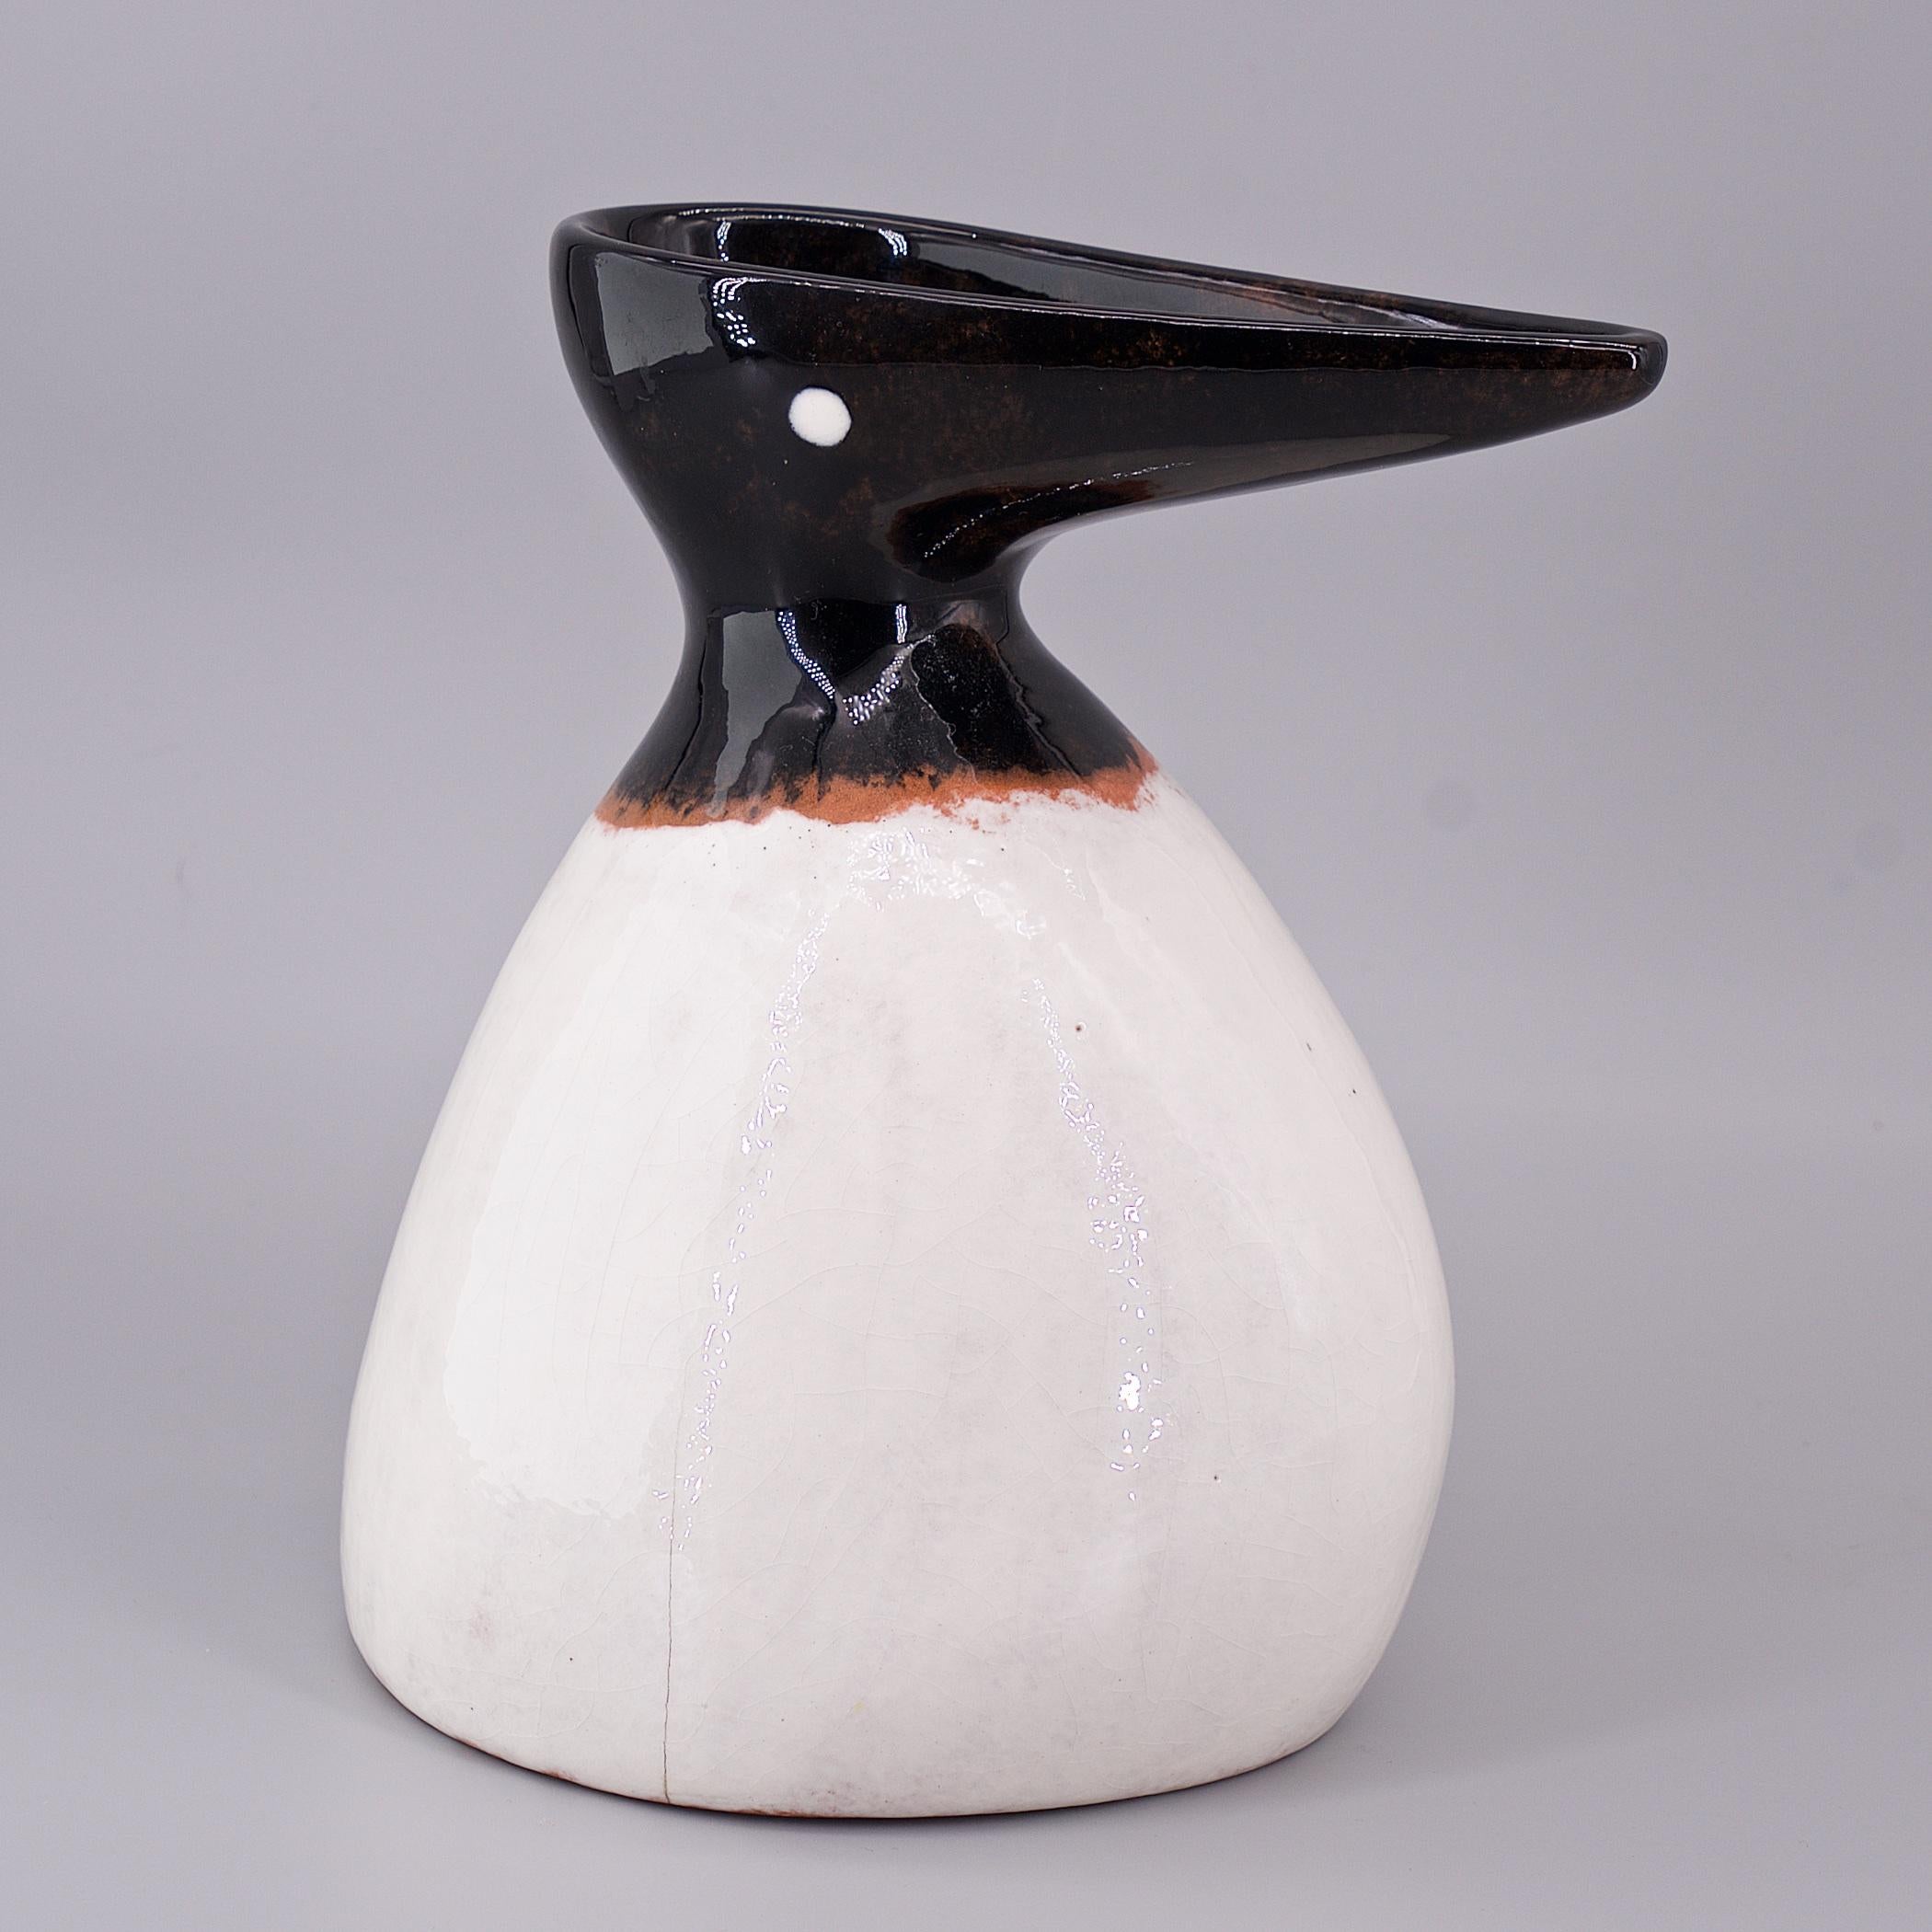 Early Edmund Ronaky for Jaru of Callfornia Sea Bird Pitcher/Vessel. Iconic Midcentury Southern California design. 
W 6 x D 5.25 x H 7.25 in.

This vessel has manufacturing defects; firing cracks to white bottom edge and to the bottom, and a glaze